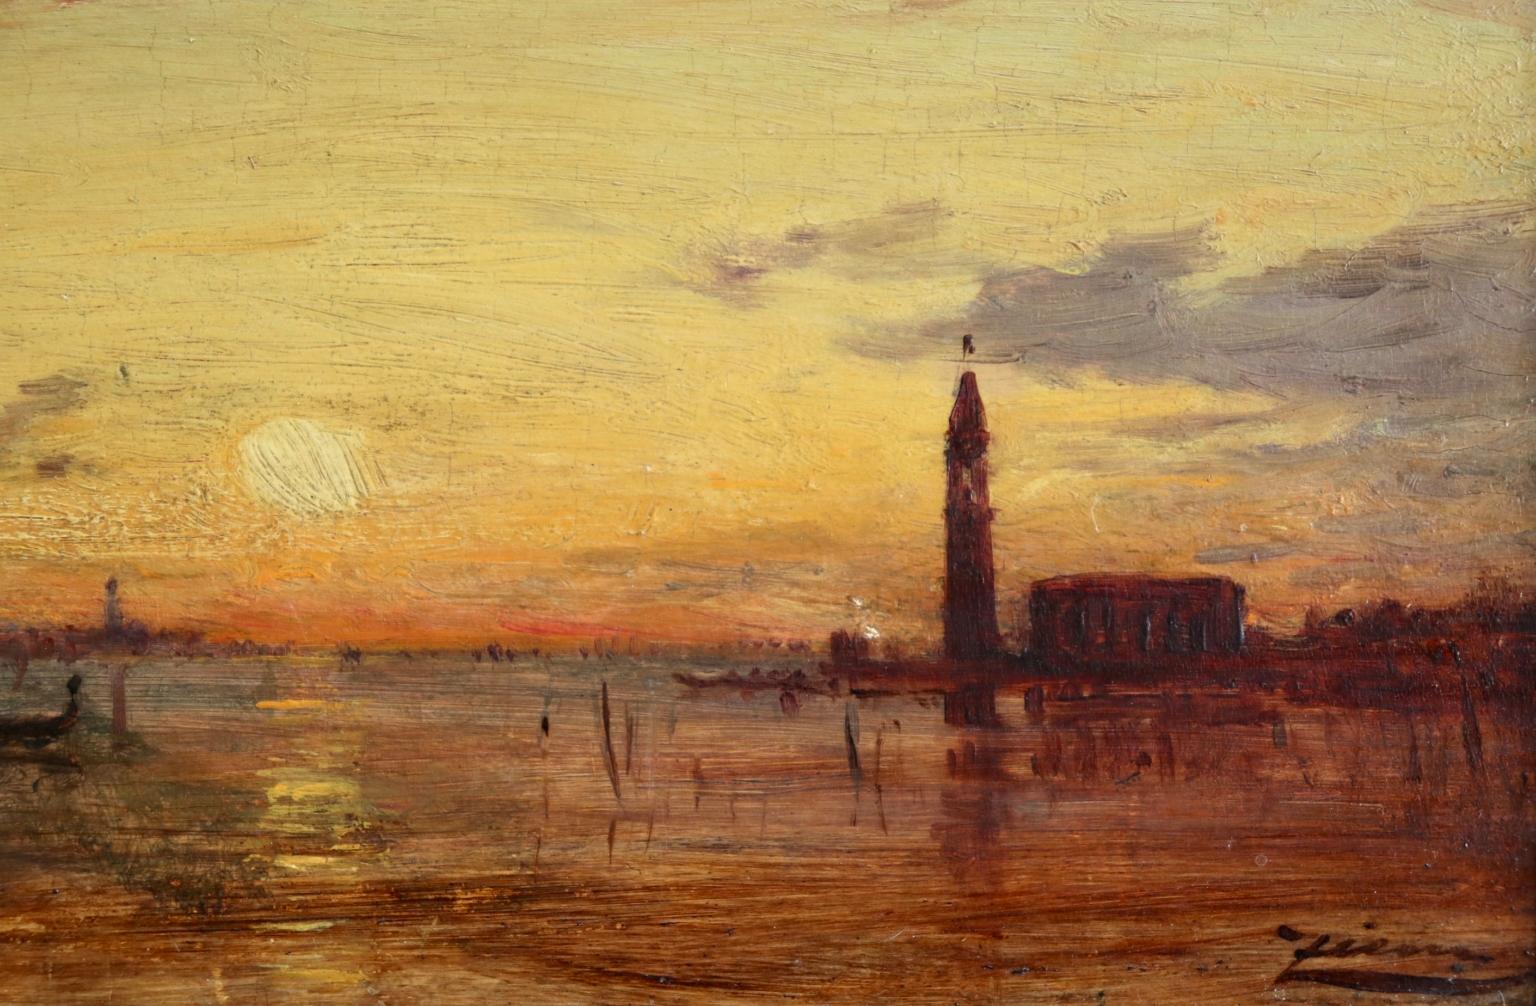 A lovely oil on panel circa 1885 by Felix Ziem depicting a gondola on the water in Venice as the sun sets behind. Signed lower right.

Dimensions:
Framed: 11.25